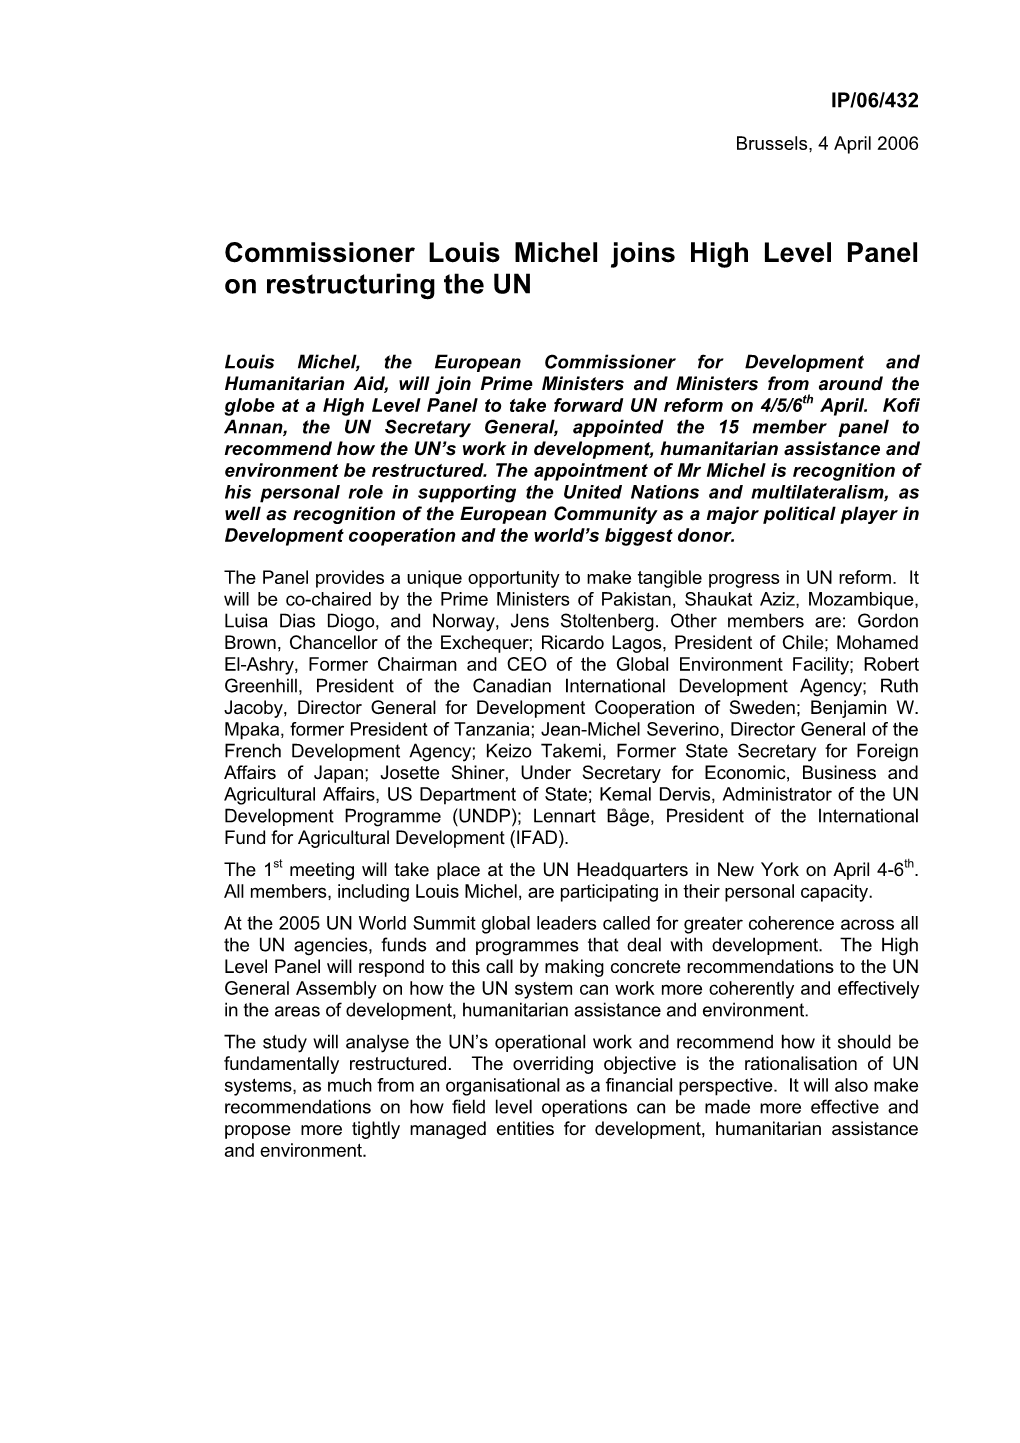 Commissioner Louis Michel Joins High Level Panel on Restructuring the UN